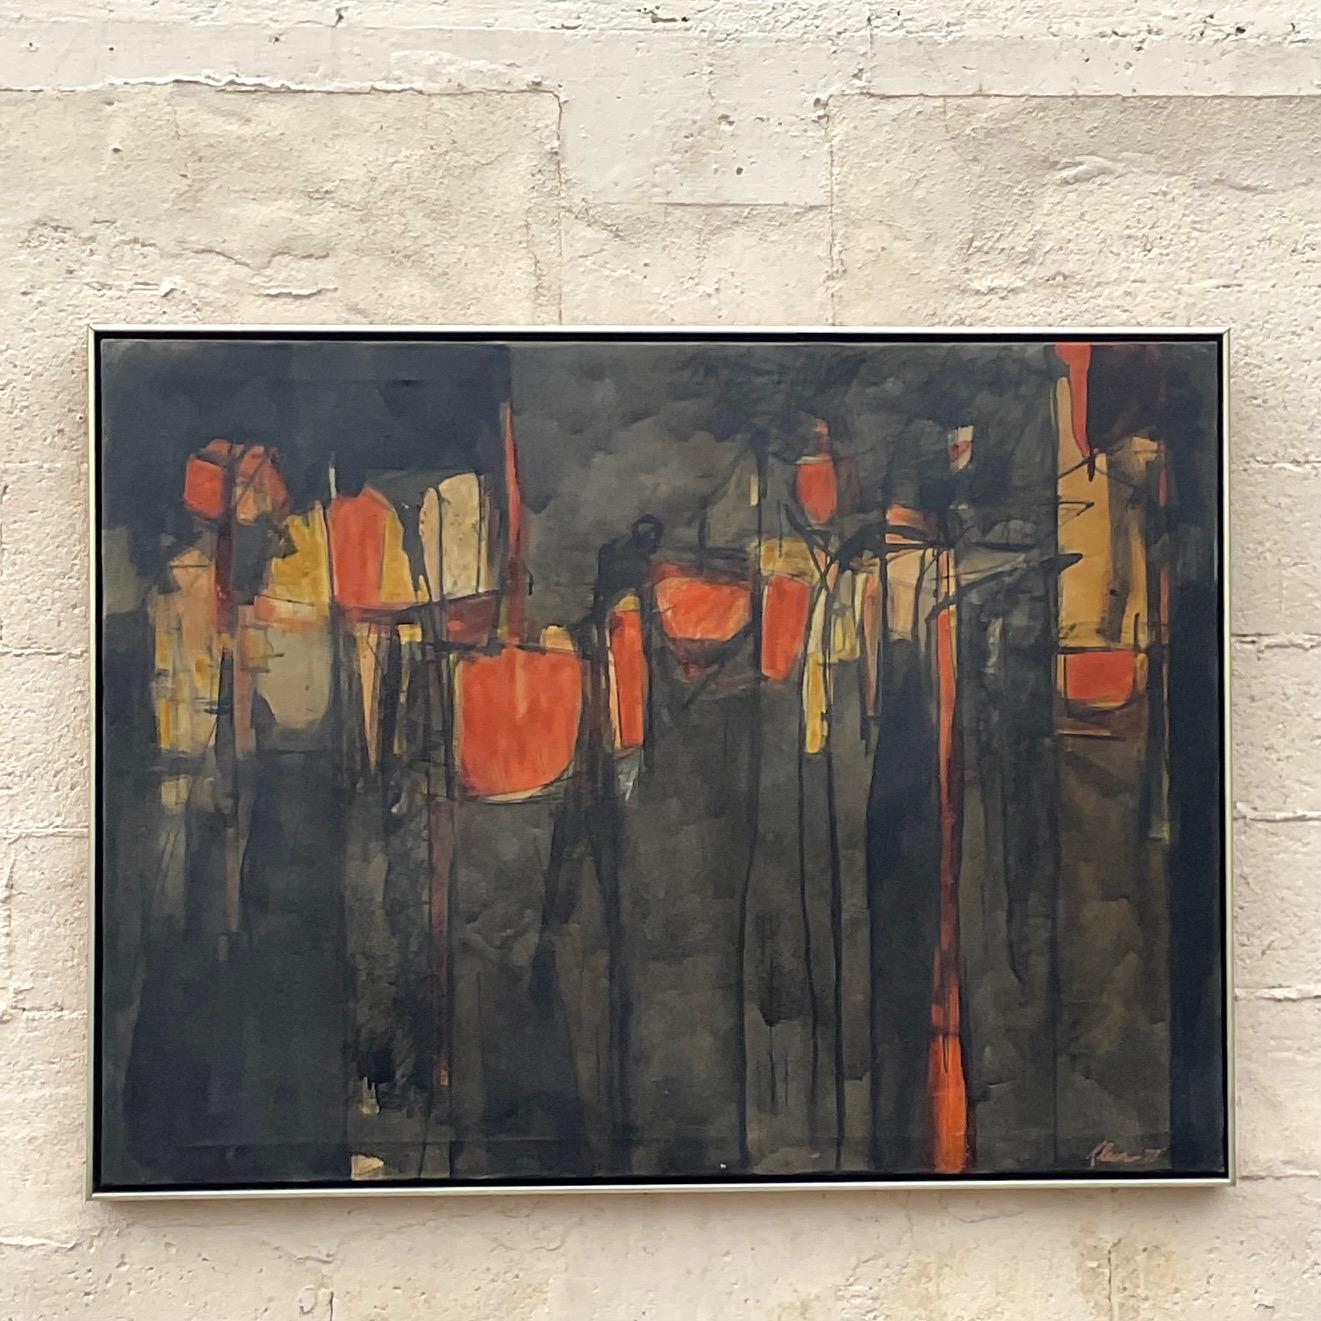 A stunning vintage MCM original oil painting on canvas. A chic Abstract in dark moody colors with a flash of orange and golds. Signed by the artist. Acquired from a Palm Beach estate. 